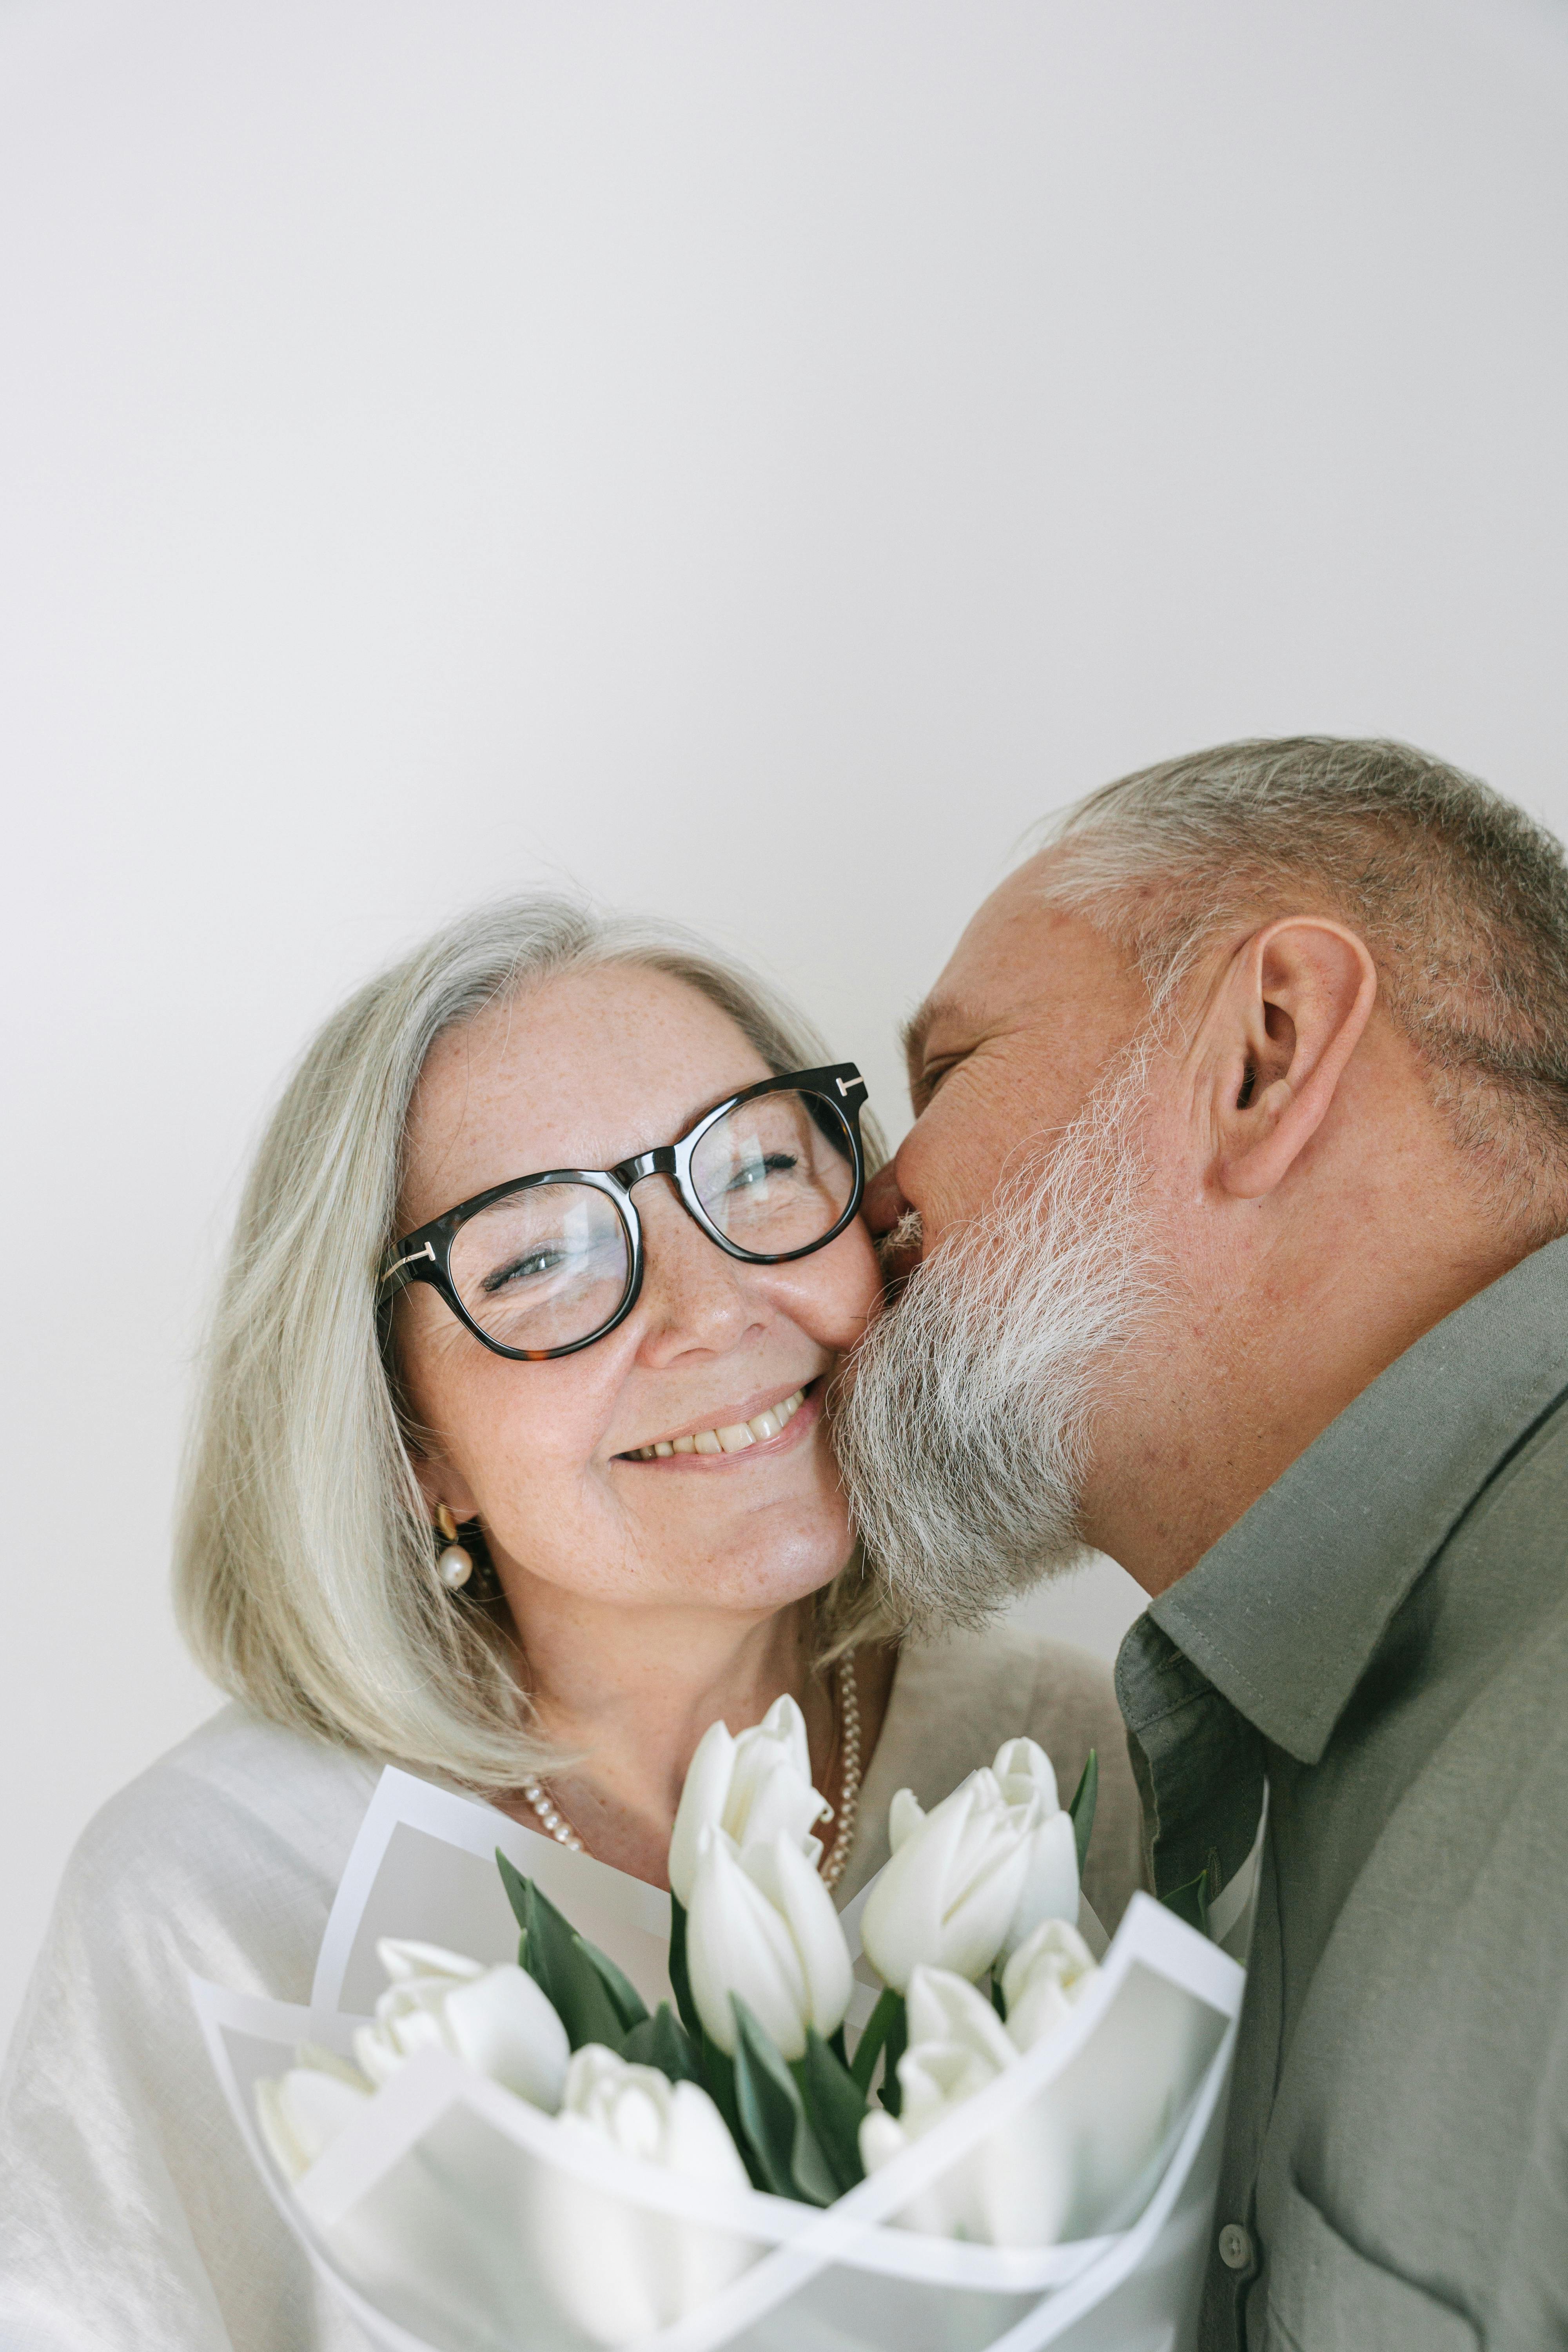 A man kissing his wife on the cheek | Source: Pexels